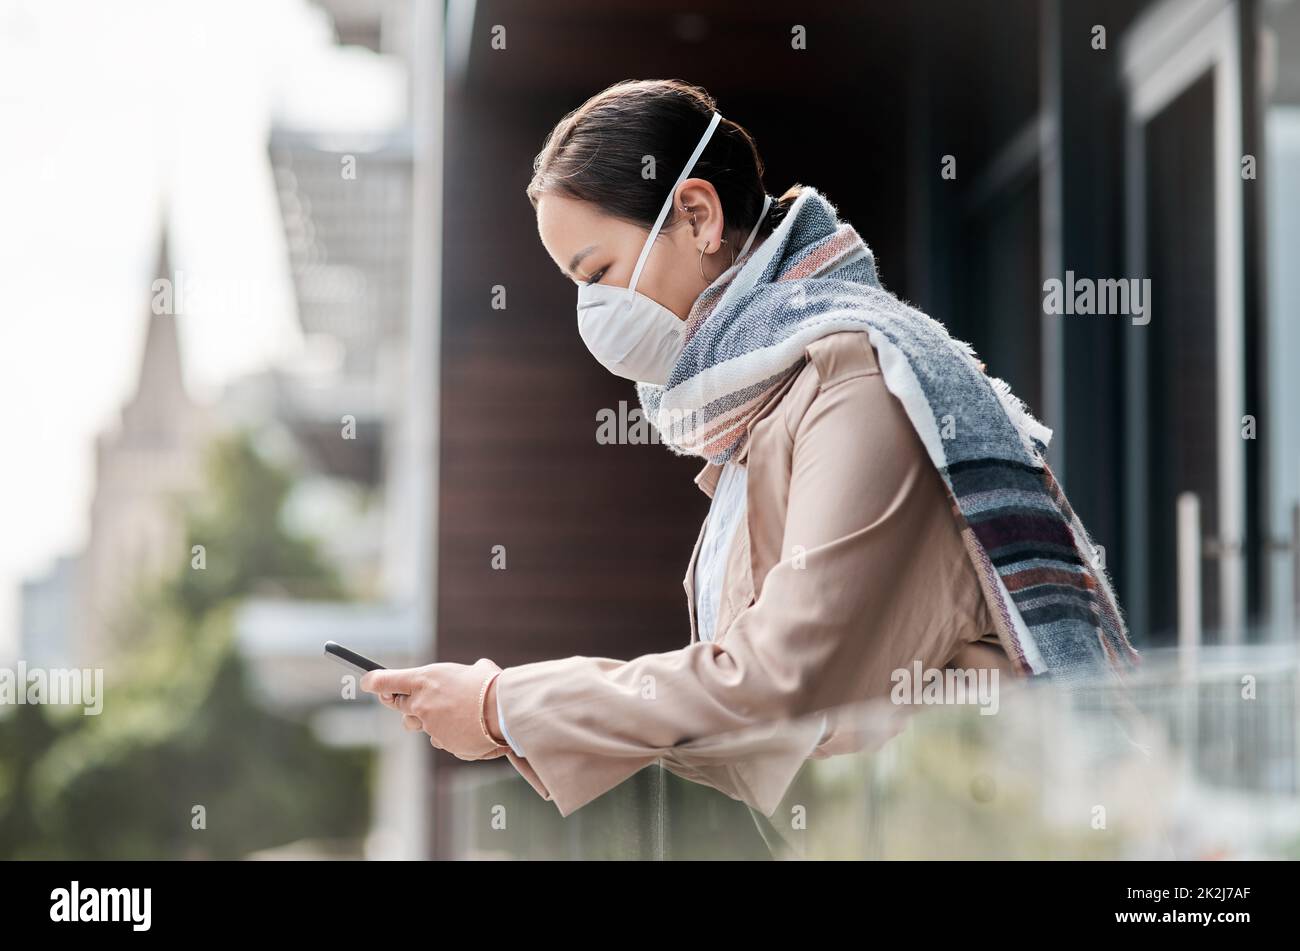 Technology allows us to be social while practising social distancing. Shot of a young woman wearing a mask and using a smartphone on the balcony at home. Stock Photo